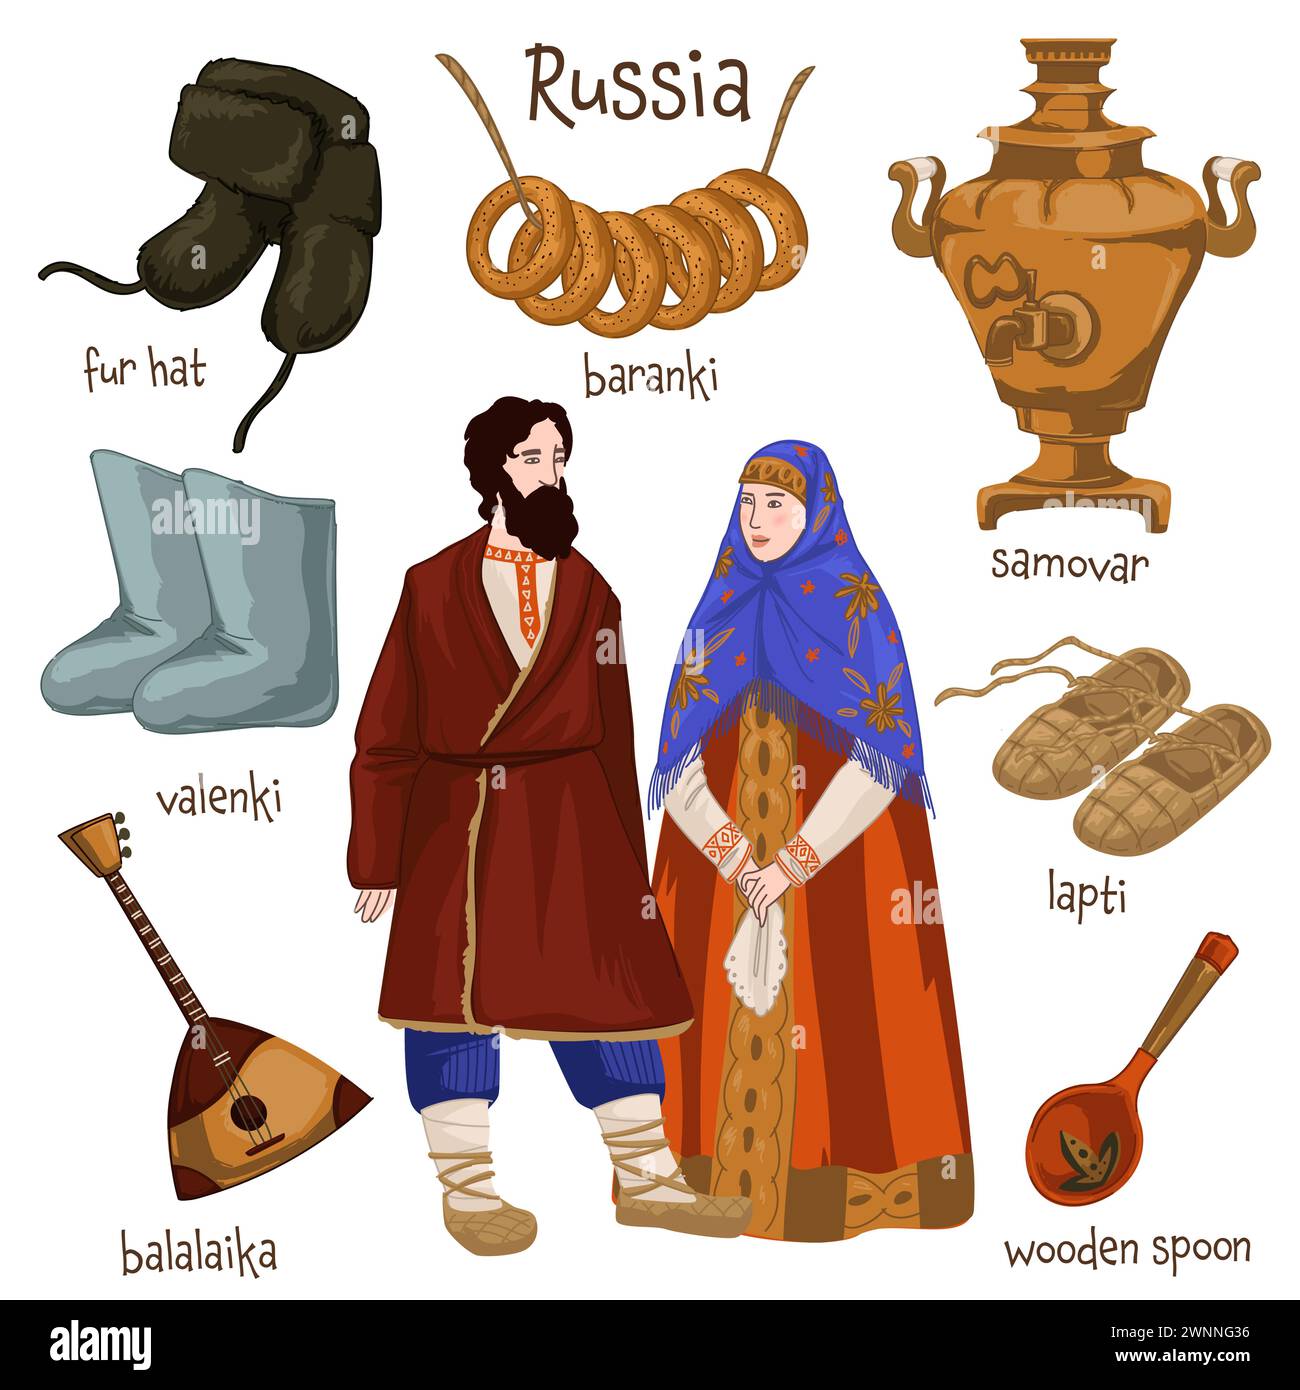 Russia traditions and culture of old times vector Stock Vector